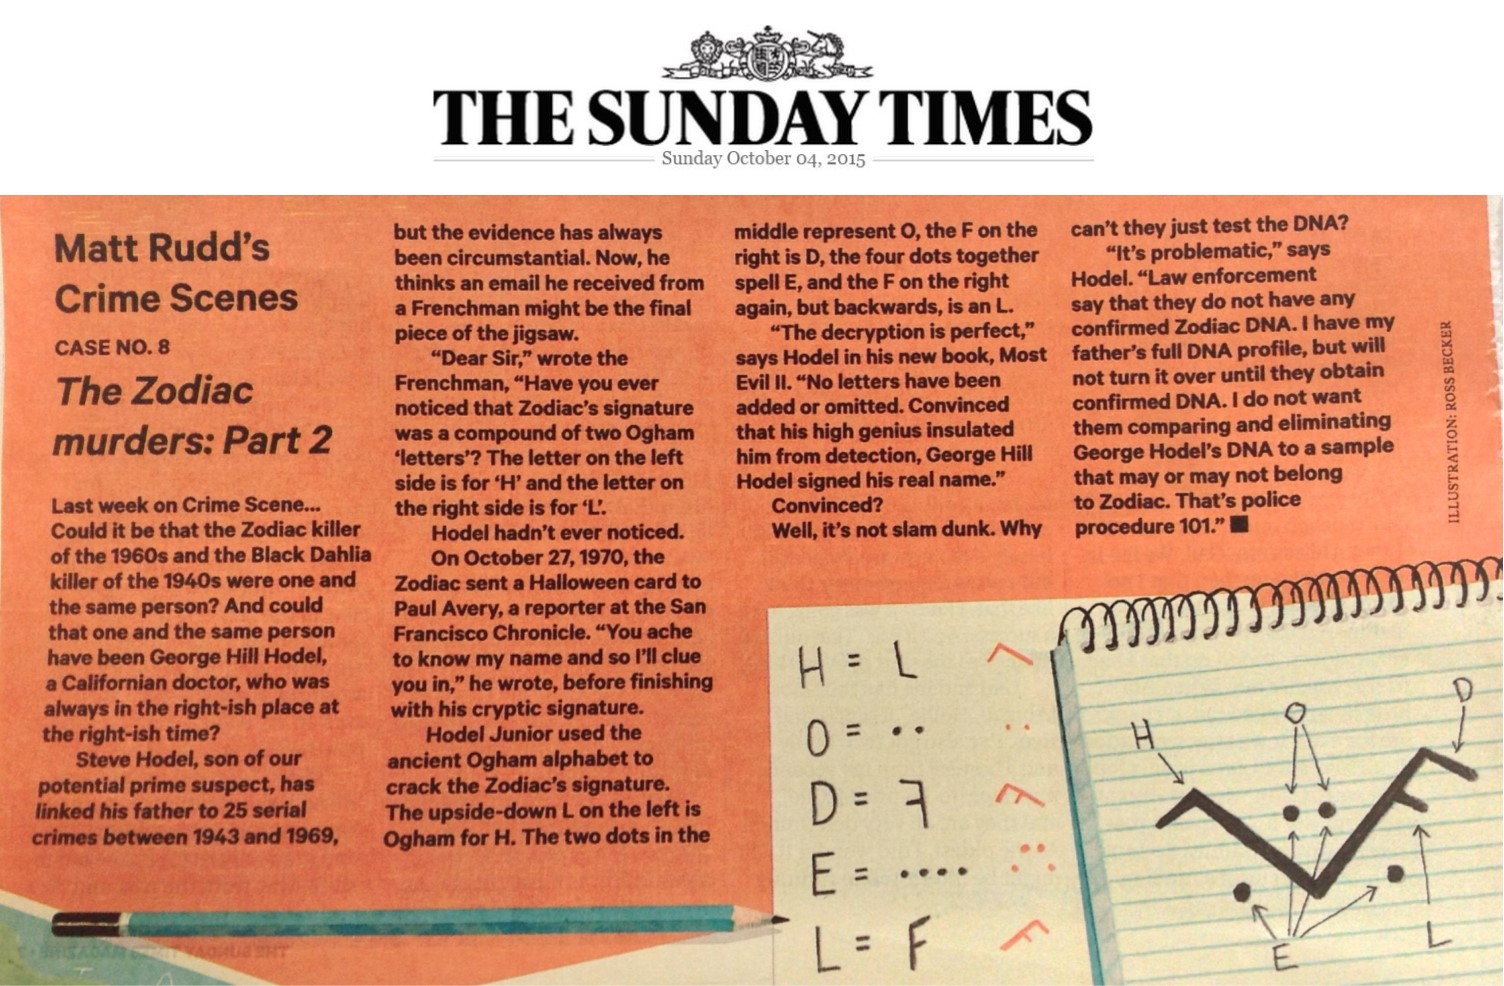 U K Sunday Times Matt Rudd S Crimes Scenes The Zodiac Murders Part 2 Columnist Asks Could The 1940s Black Dahlia Avenger And The 1960s Zodiac Be The Same Person Dr George Hill Hodel